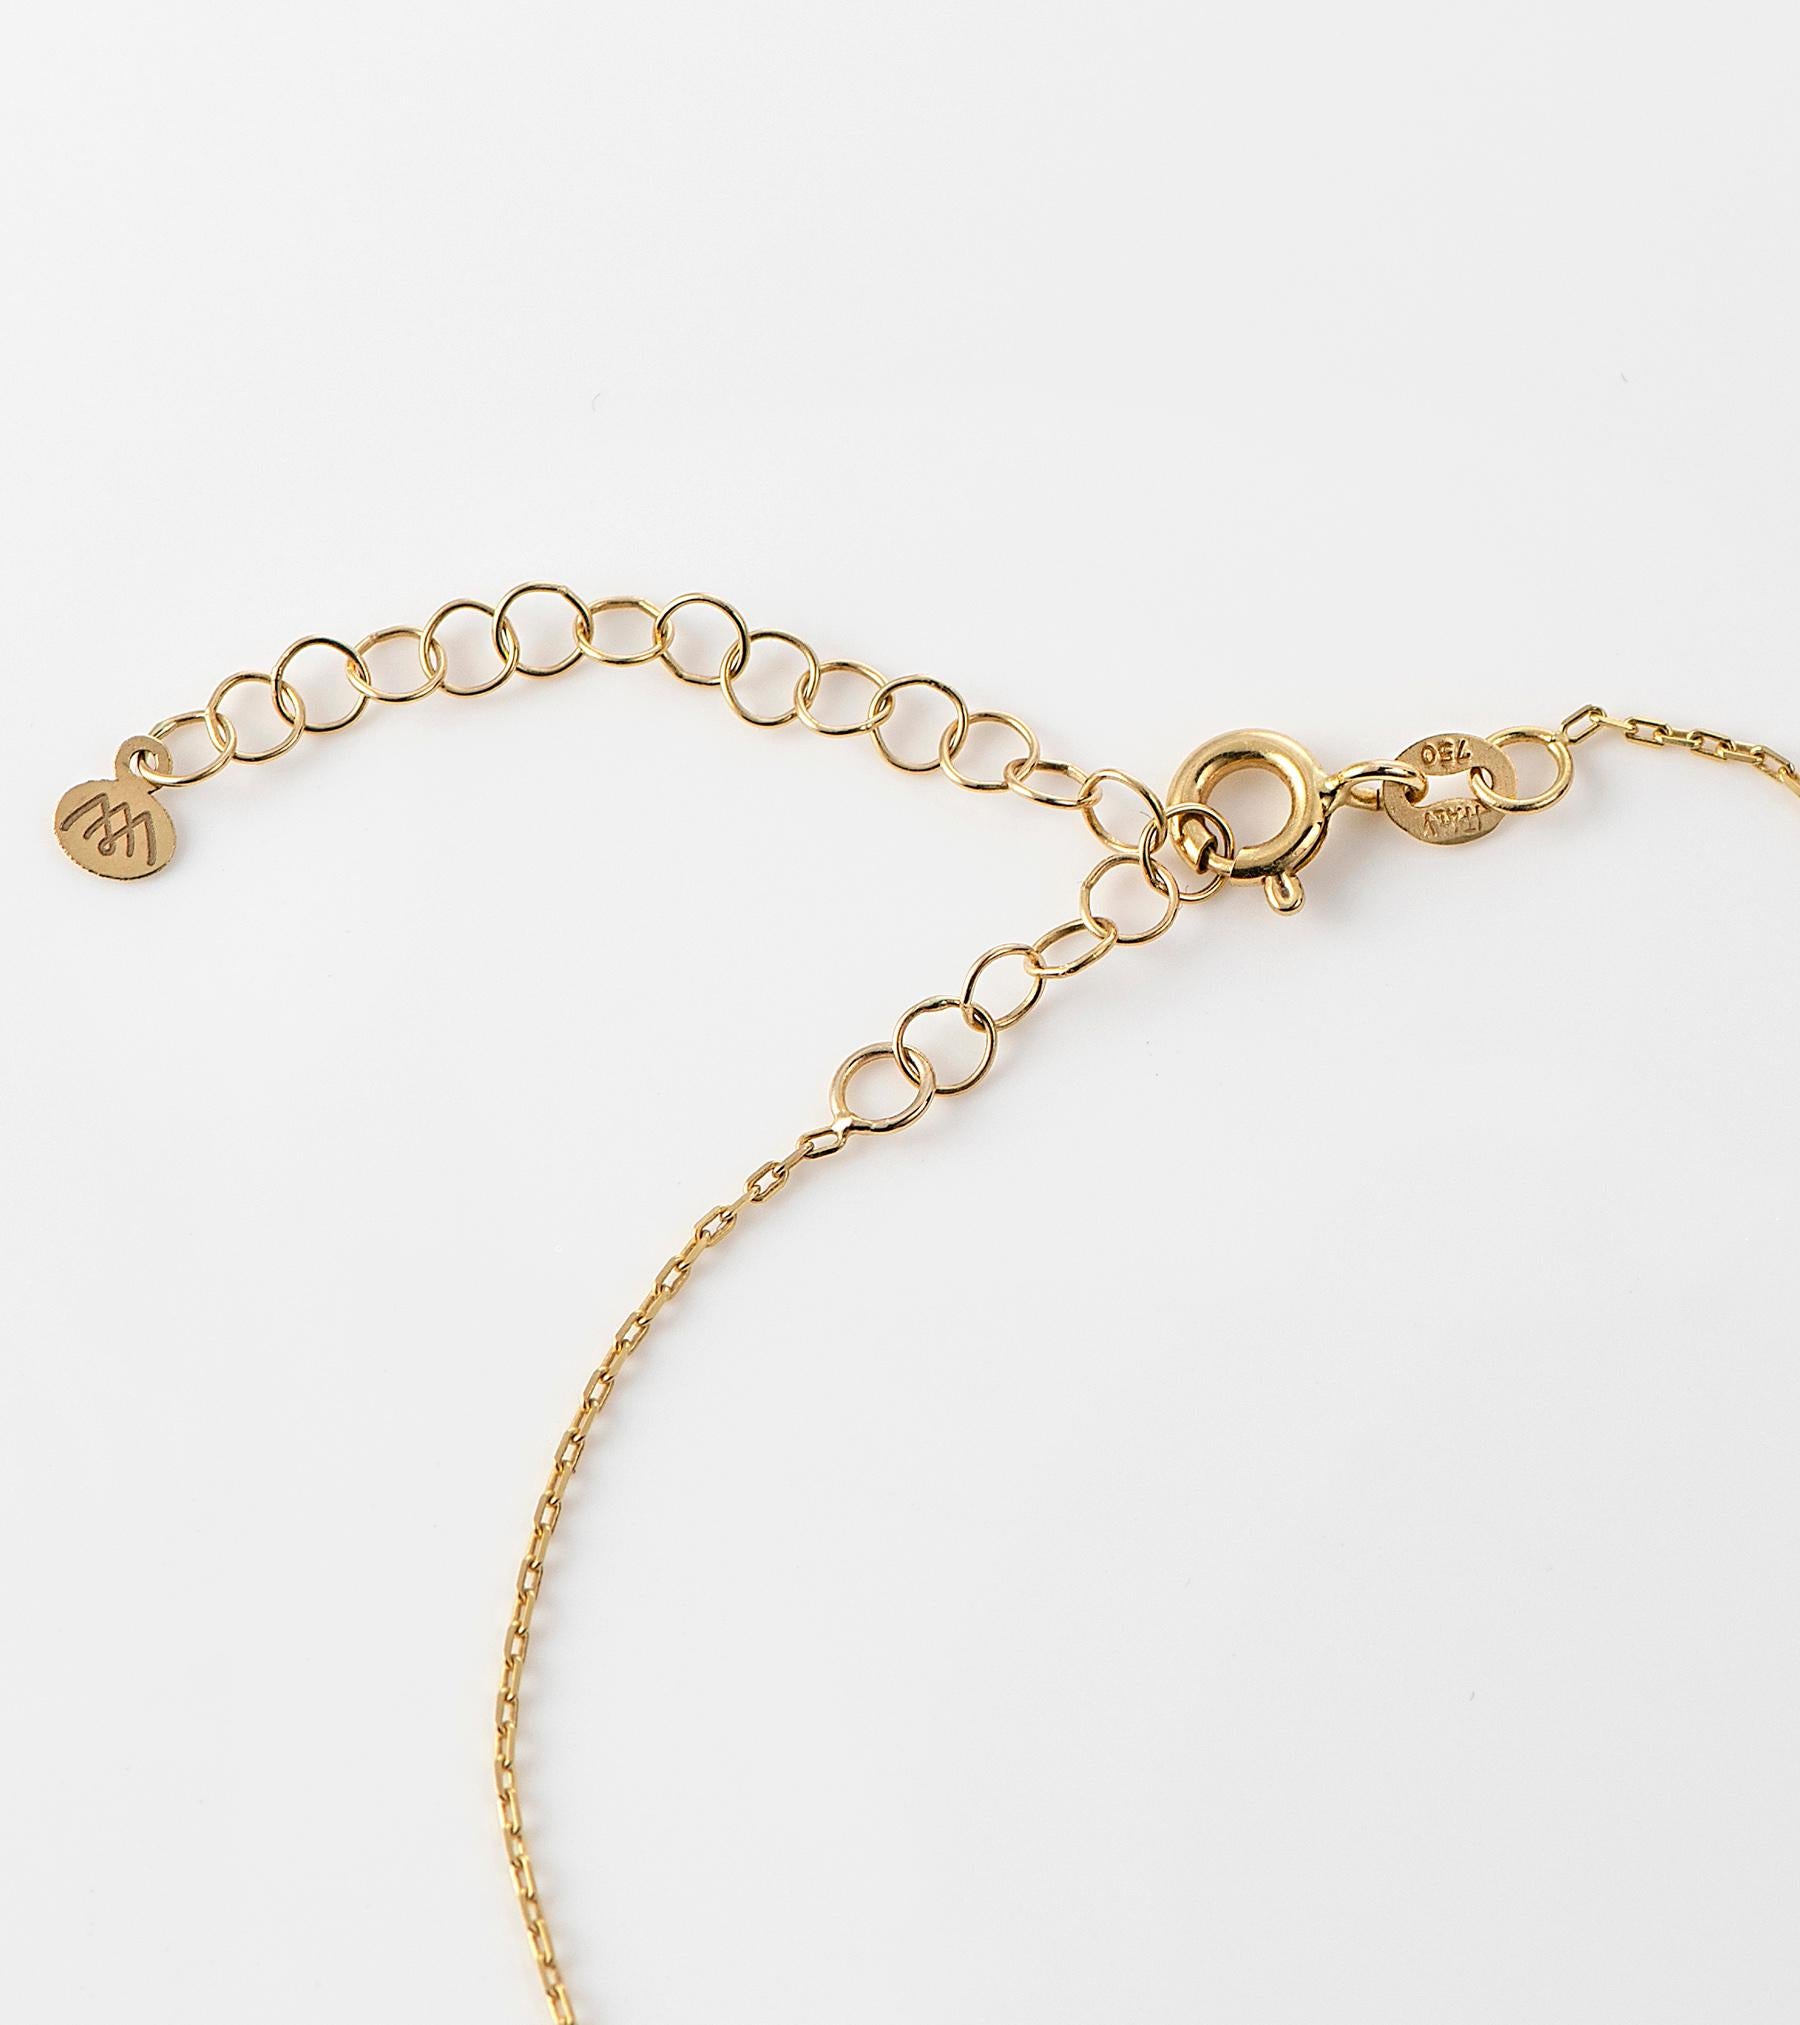 An array of dangling mini freshwater pearls in various sizes hanging from a delicate chain fitted closely around the base of neck. 

This choker offers a modern take on the classic pearl choker, and will add a touch of playfulness to any look.

All